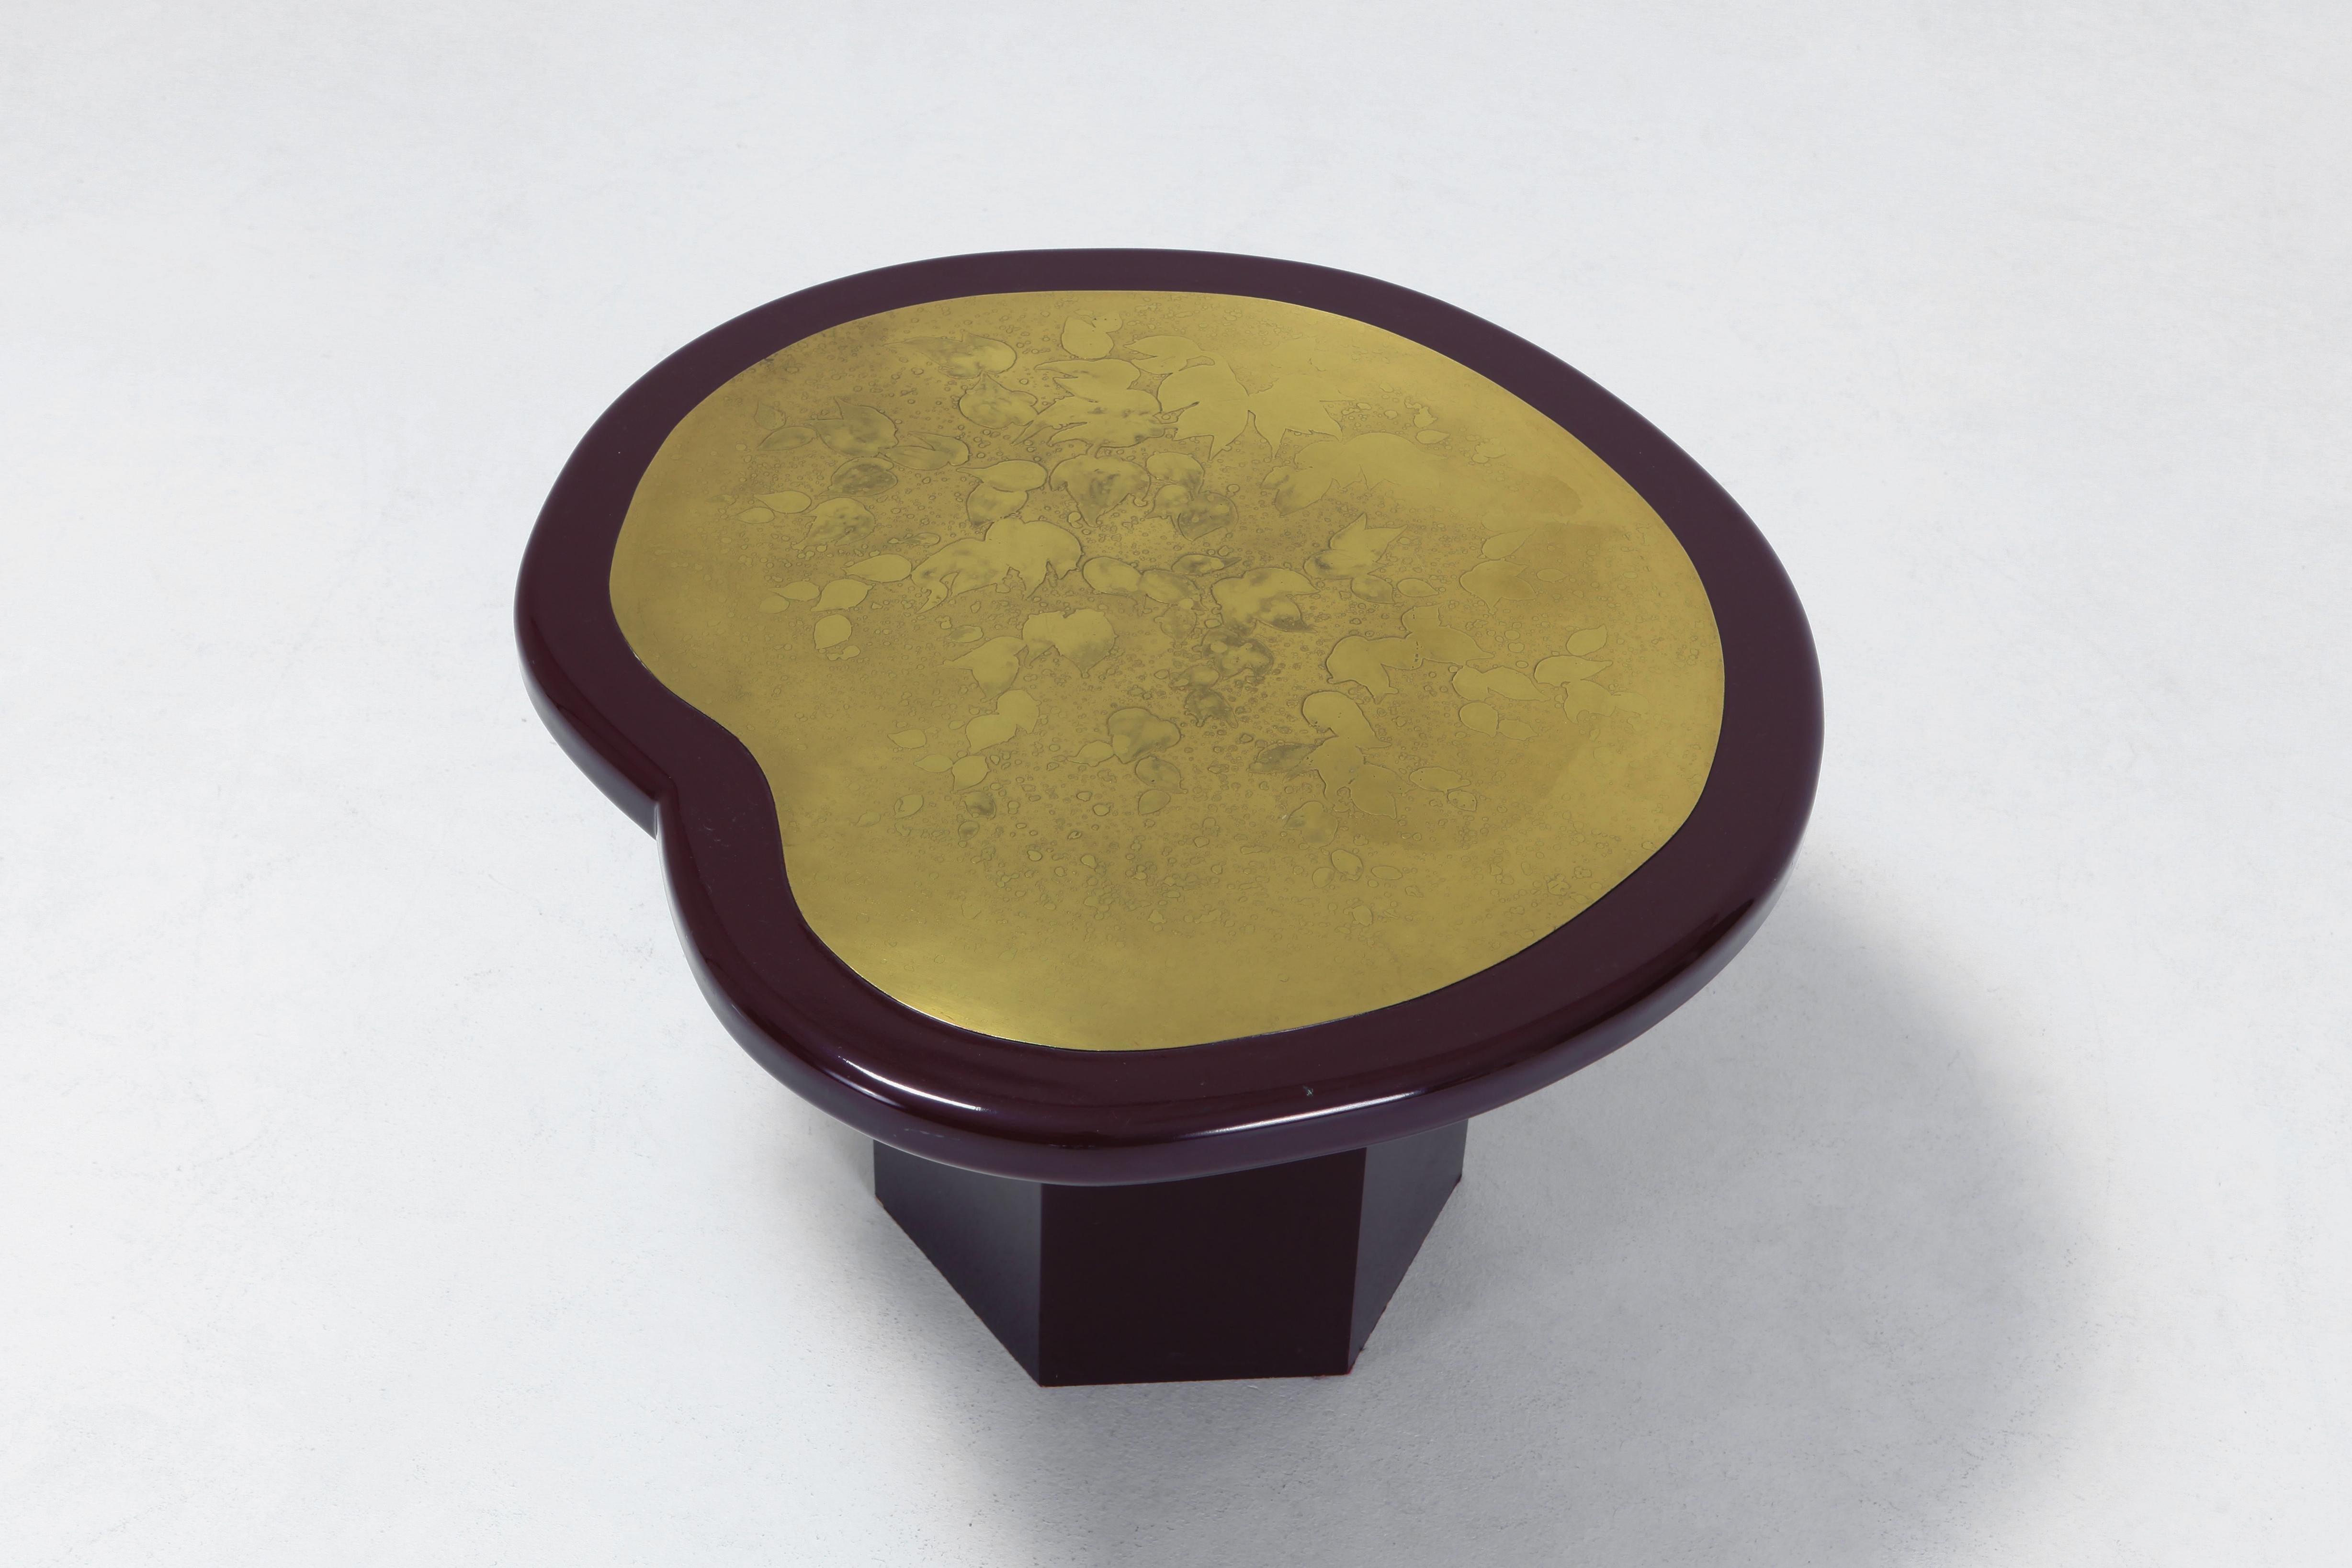 Brass etched top, occasional table, Belgium, 1970s

Burgundy lacquered base
A 1970s variant of the 1950s 'kidney table'
Would fit well in an eclectic Hollywood regency inspired decor.

 